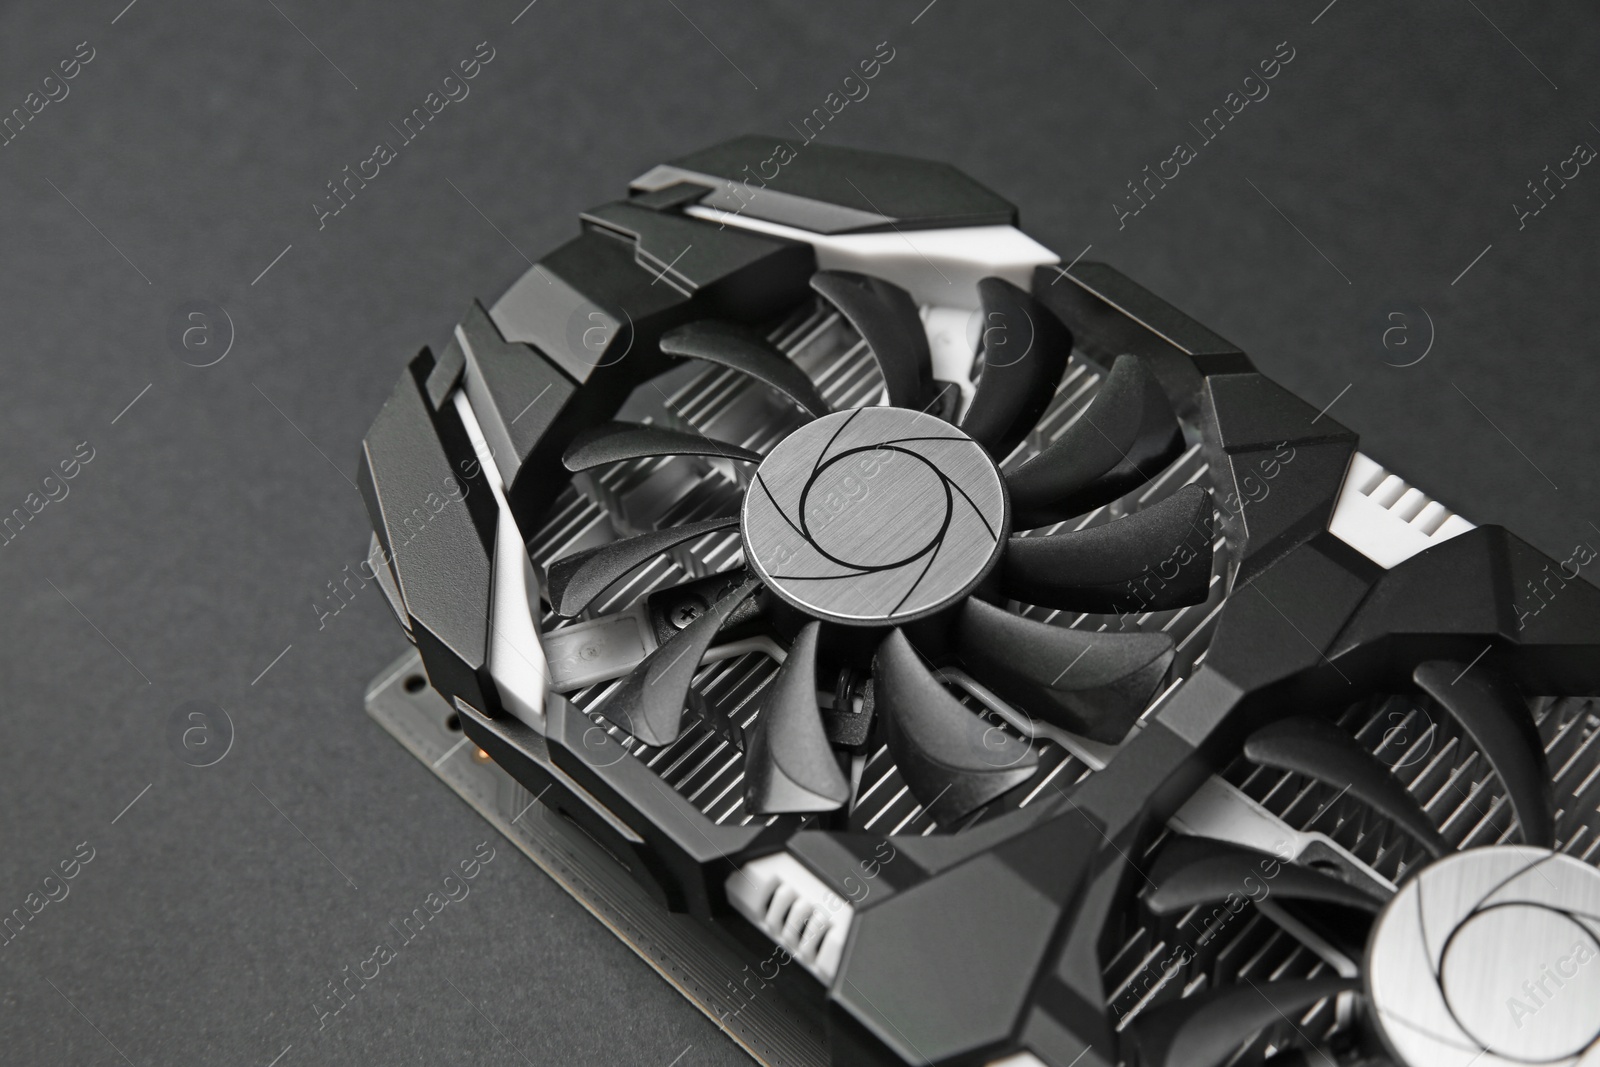 Photo of Computer graphics card on black background, closeup